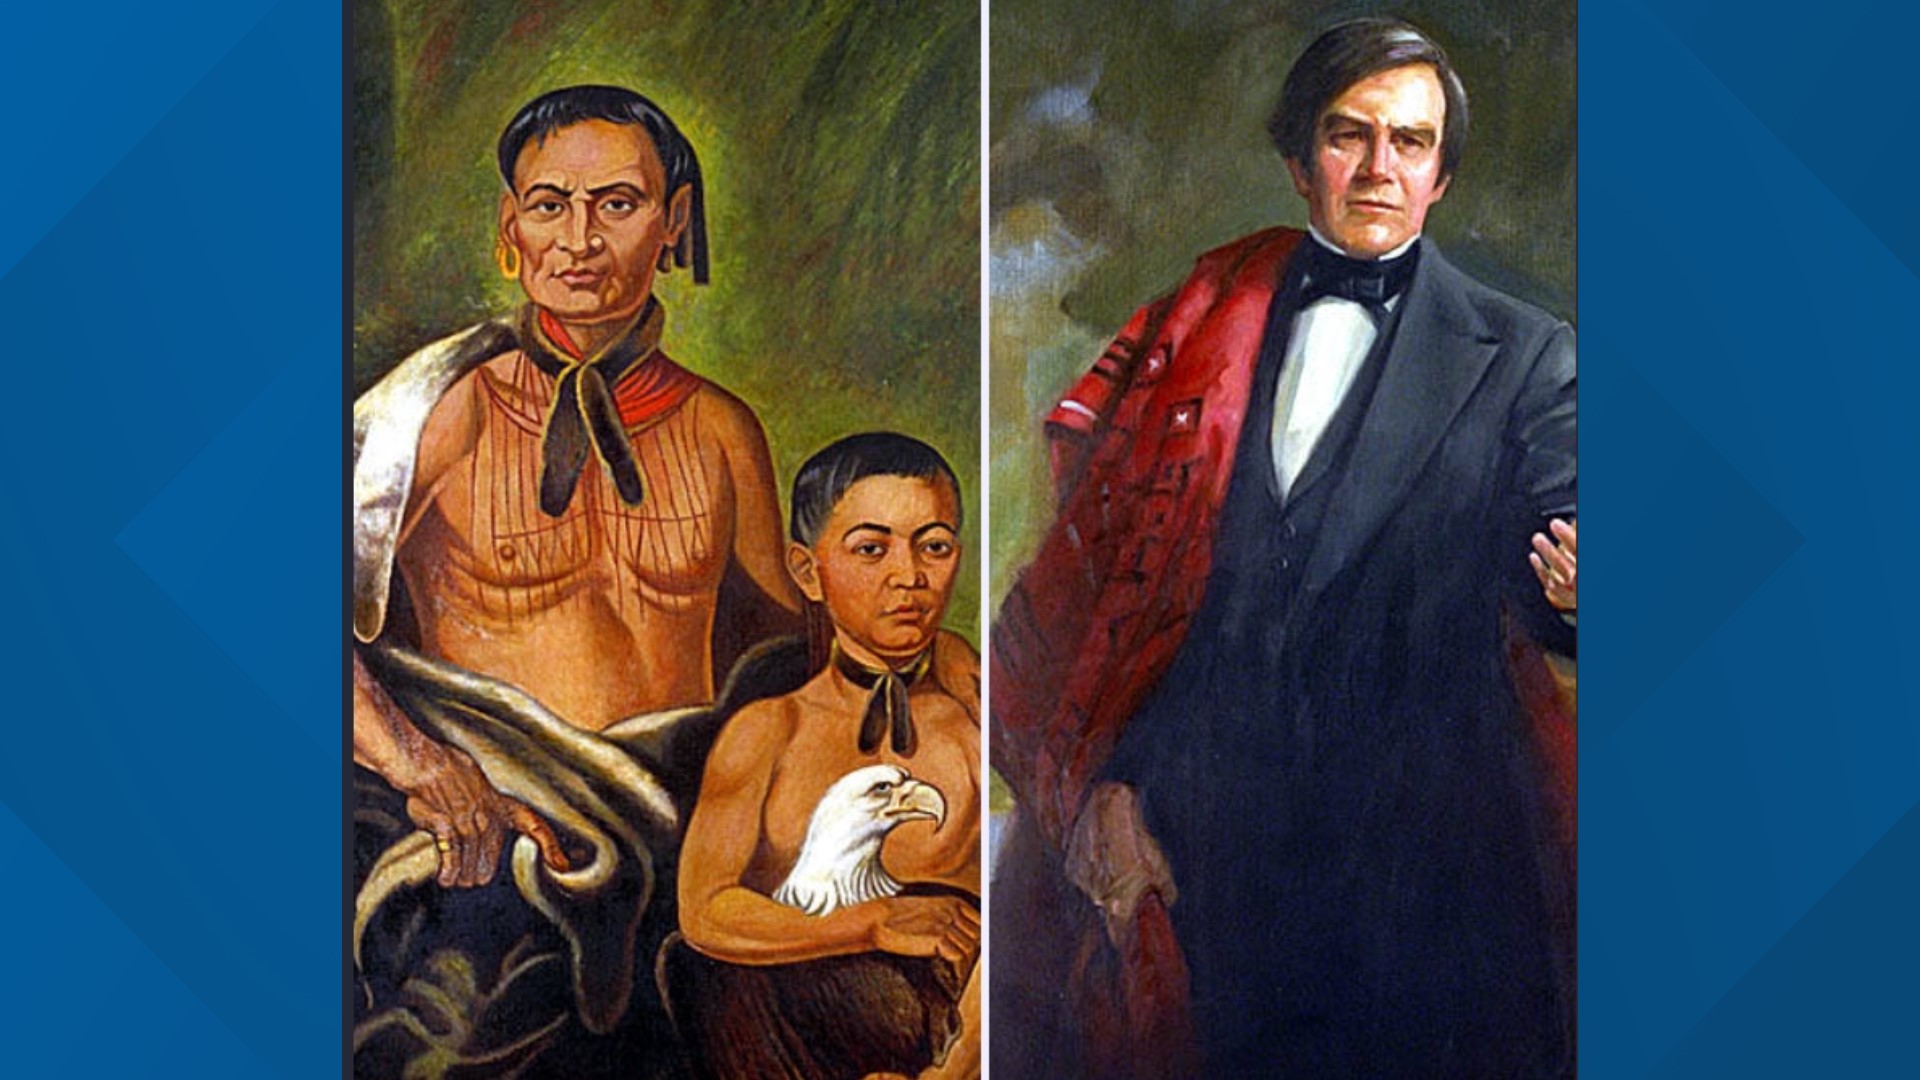 Within the almost 300 portraits, sculptures and other memorials, the stories of three prominent Native Americans are featured.